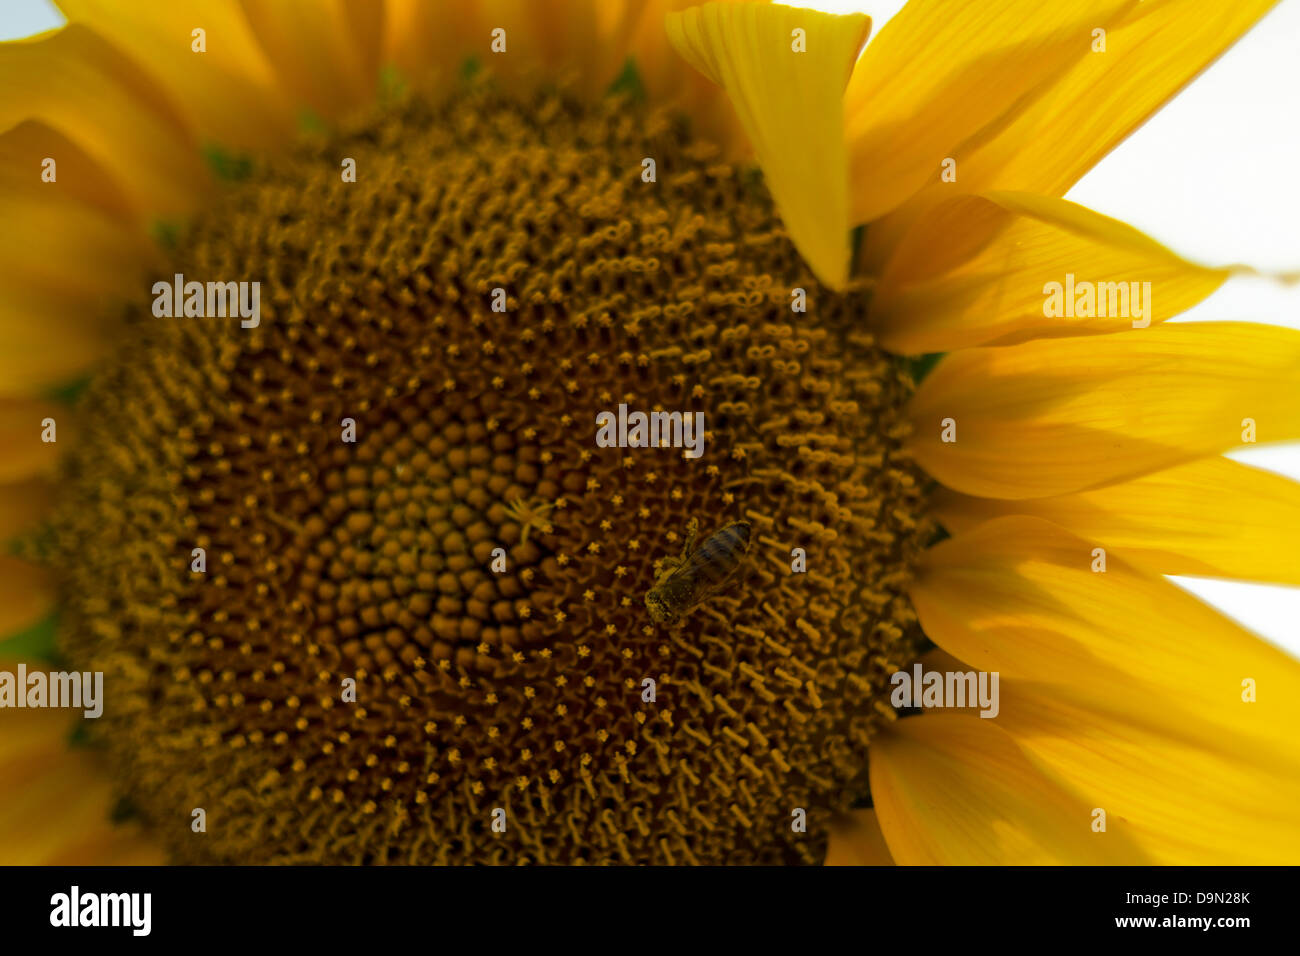 A bee collecting pollen from a sunflower Stock Photo